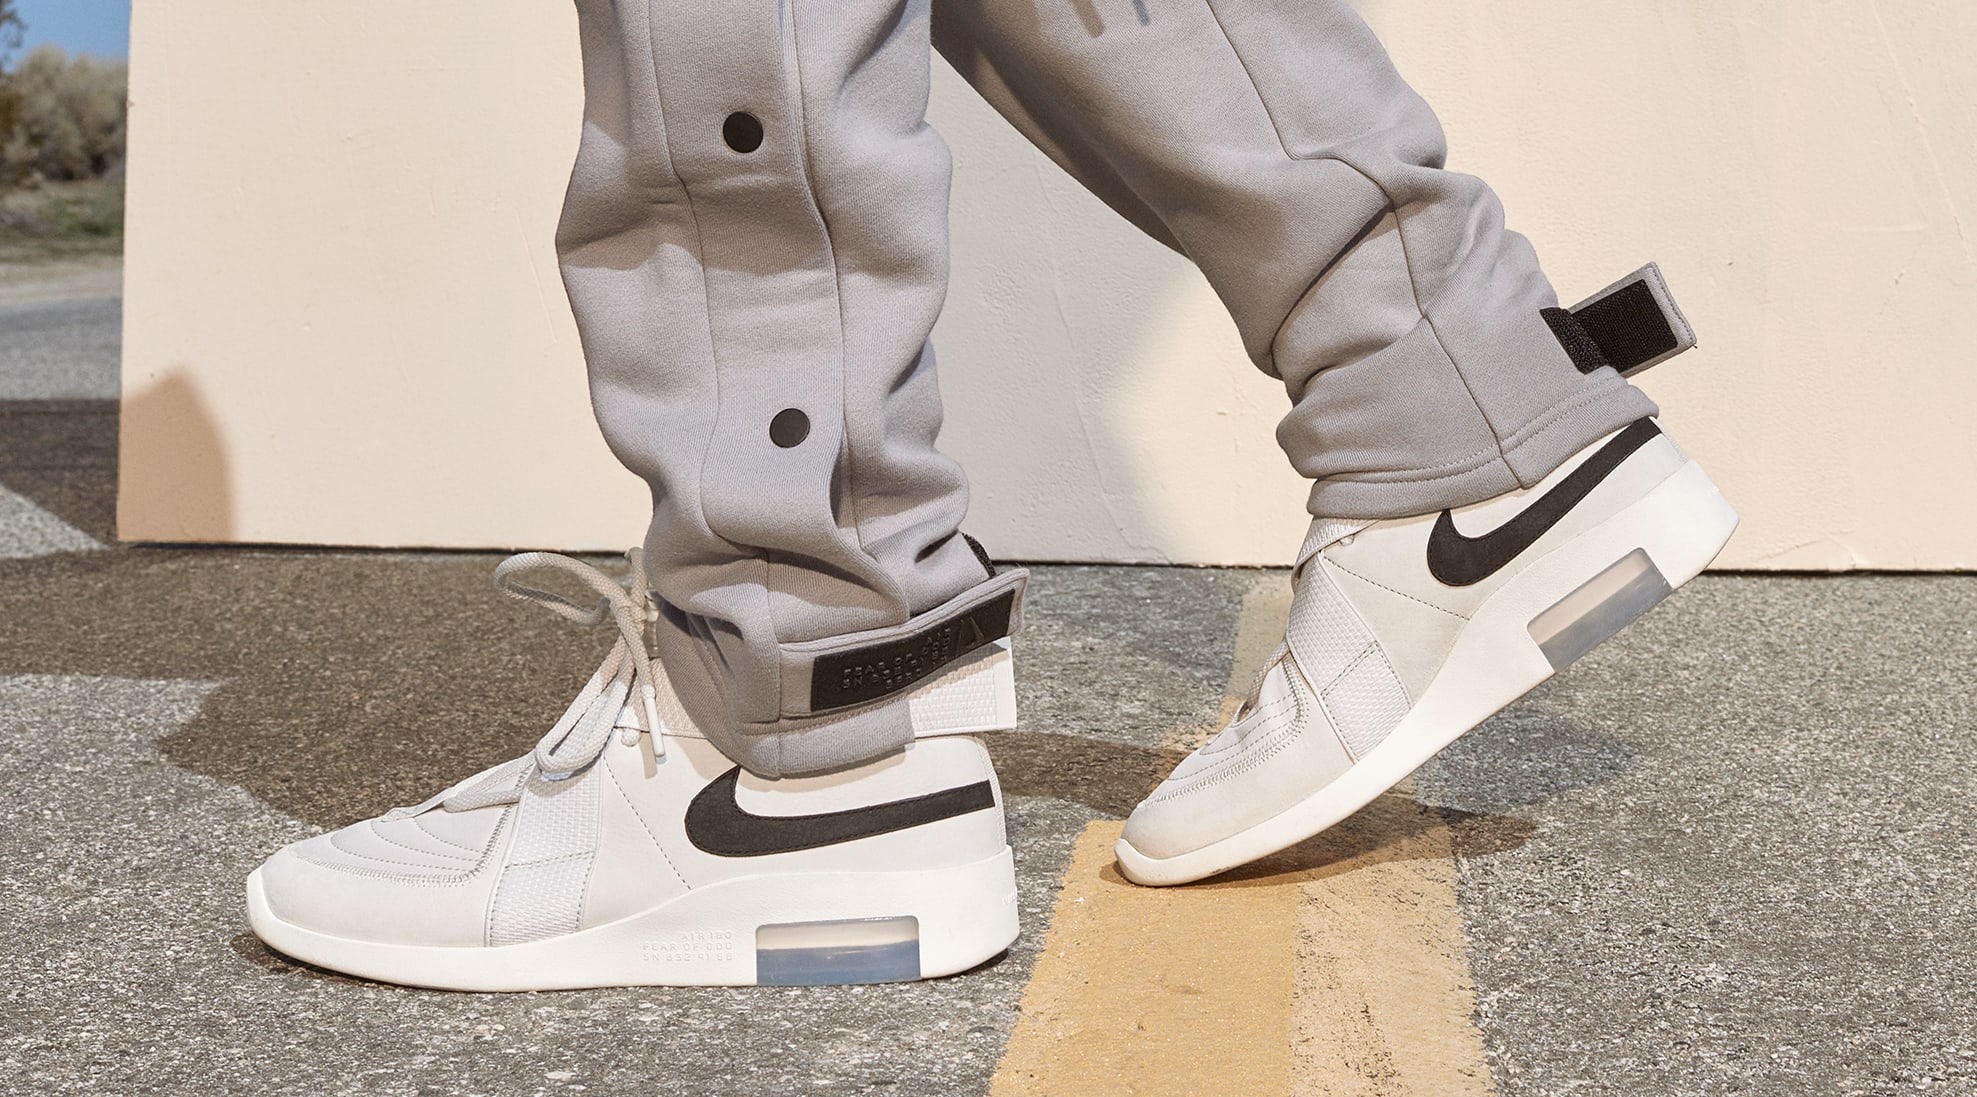 Fear of God x Nike Release SS19 Collection